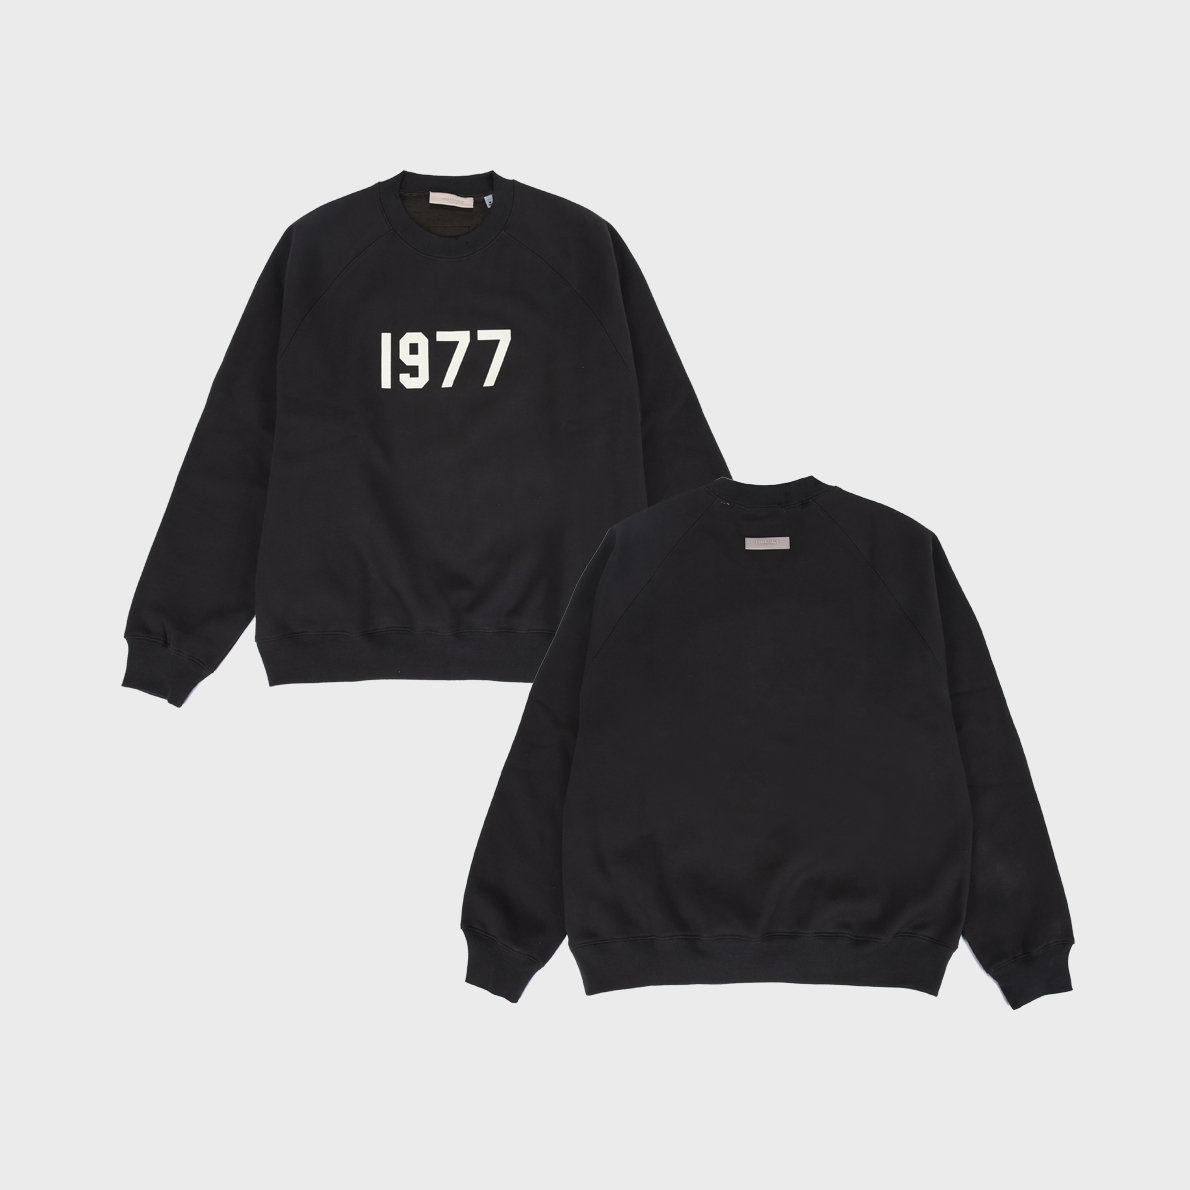 FEAR OF GOD ESSENTIALS 1977 スウェット 黒